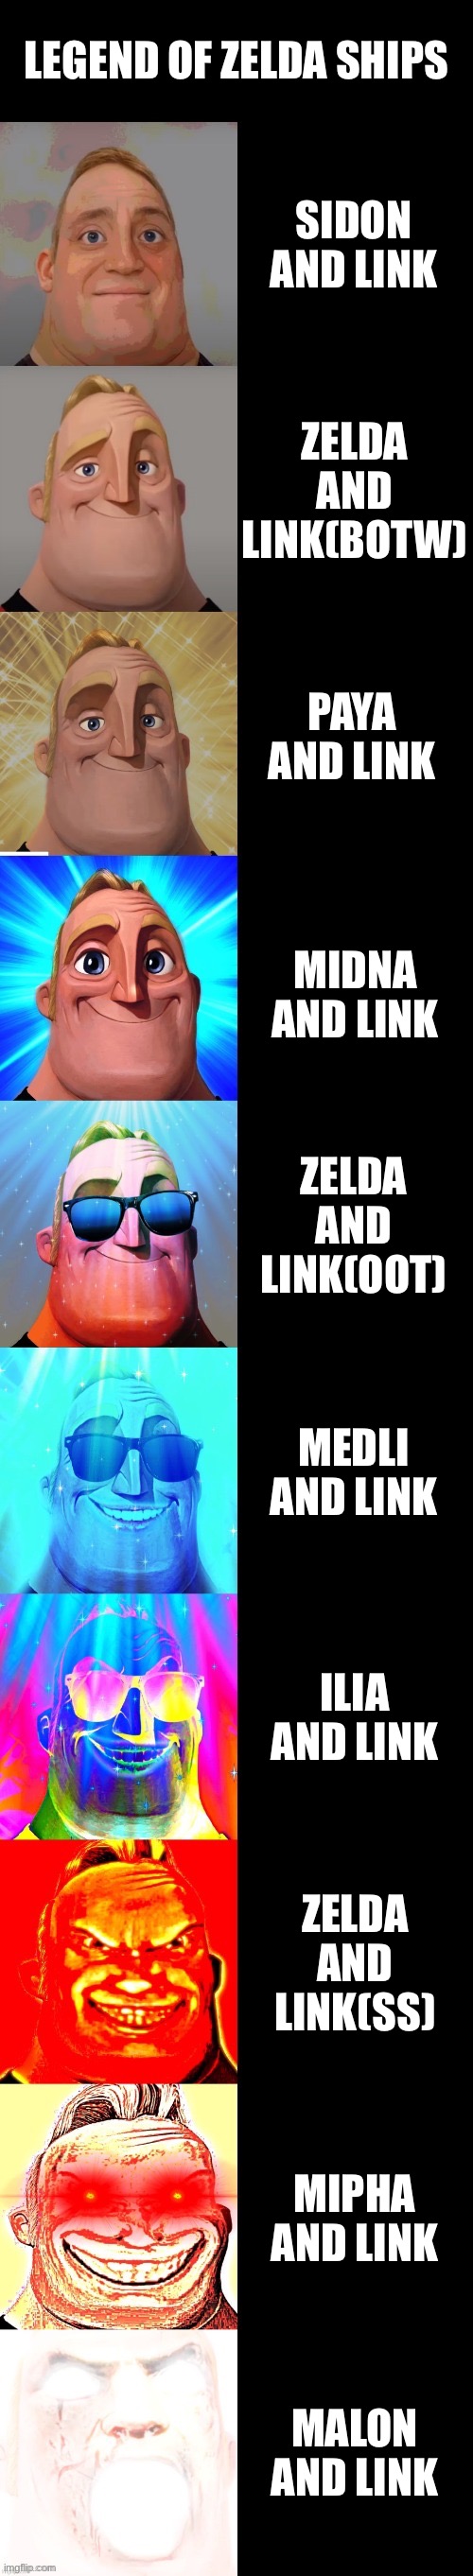 mr incredible becoming canny | LEGEND OF ZELDA SHIPS; SIDON AND LINK; ZELDA AND LINK(BOTW); PAYA AND LINK; MIDNA AND LINK; ZELDA AND LINK(OOT); MEDLI AND LINK; ILIA AND LINK; ZELDA AND LINK(SS); MIPHA AND LINK; MALON AND LINK | image tagged in mr incredible becoming canny | made w/ Imgflip meme maker